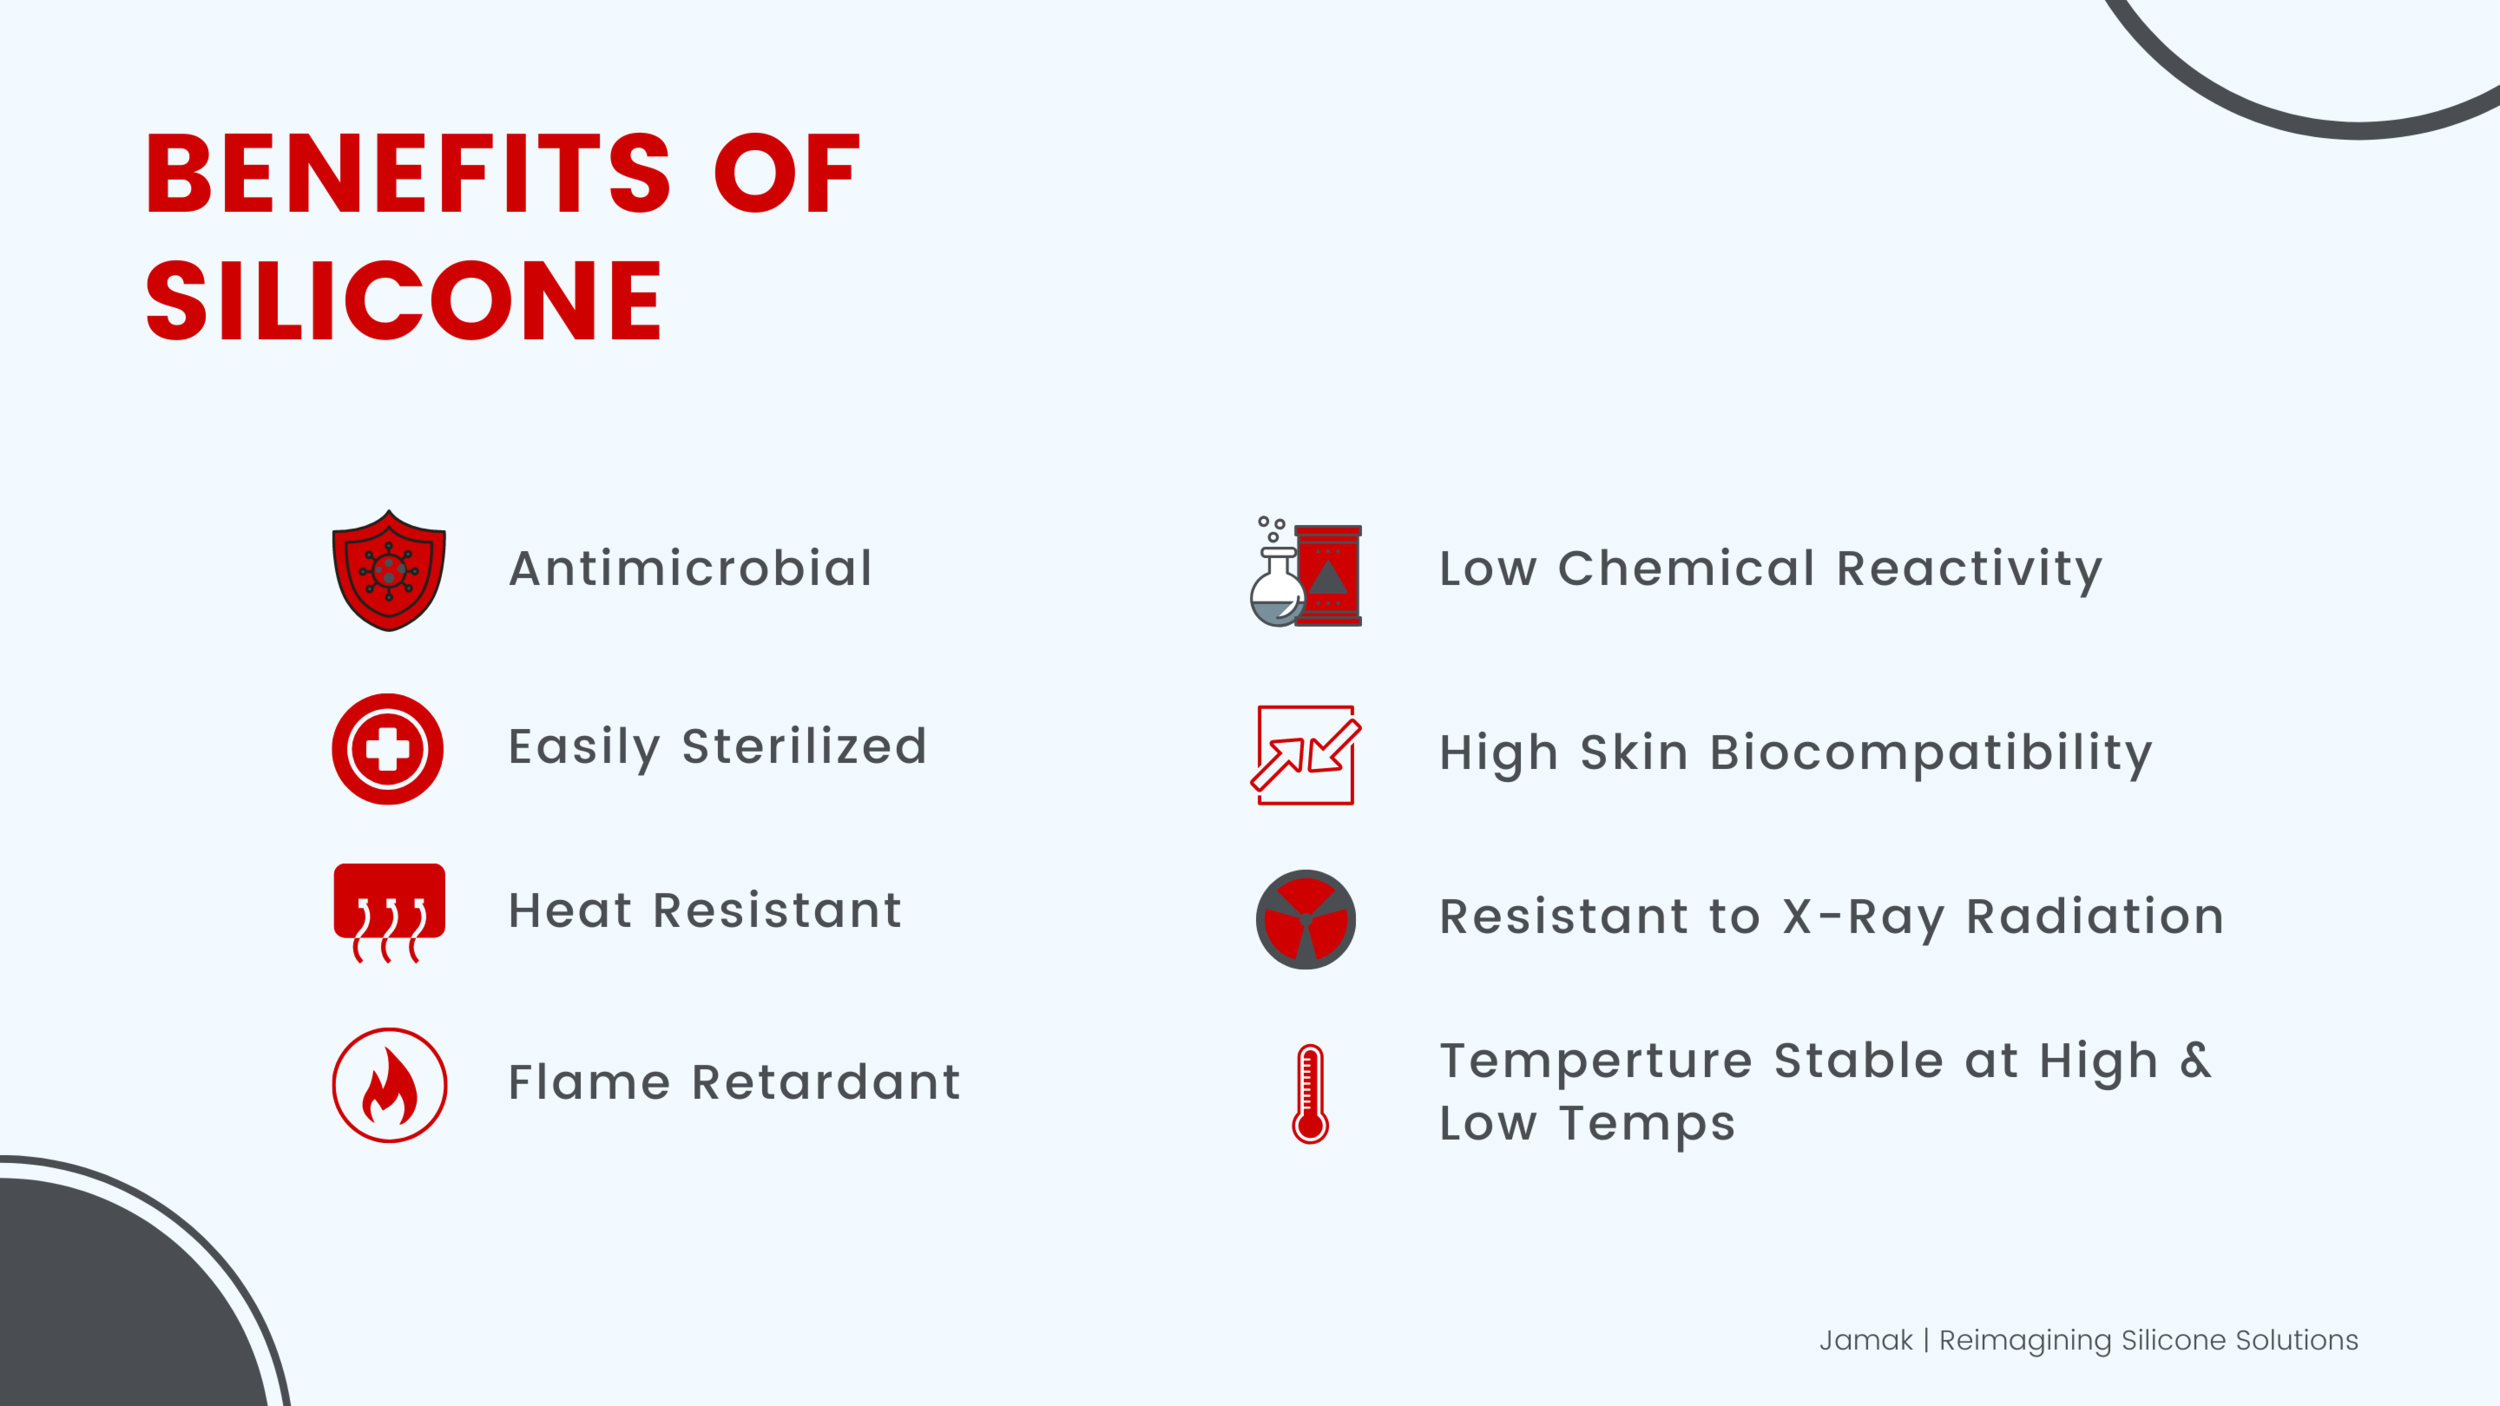  Silicone offers excellent heat resistance, good chemical resistance, and is resistant to UV and X-Ray radiation.